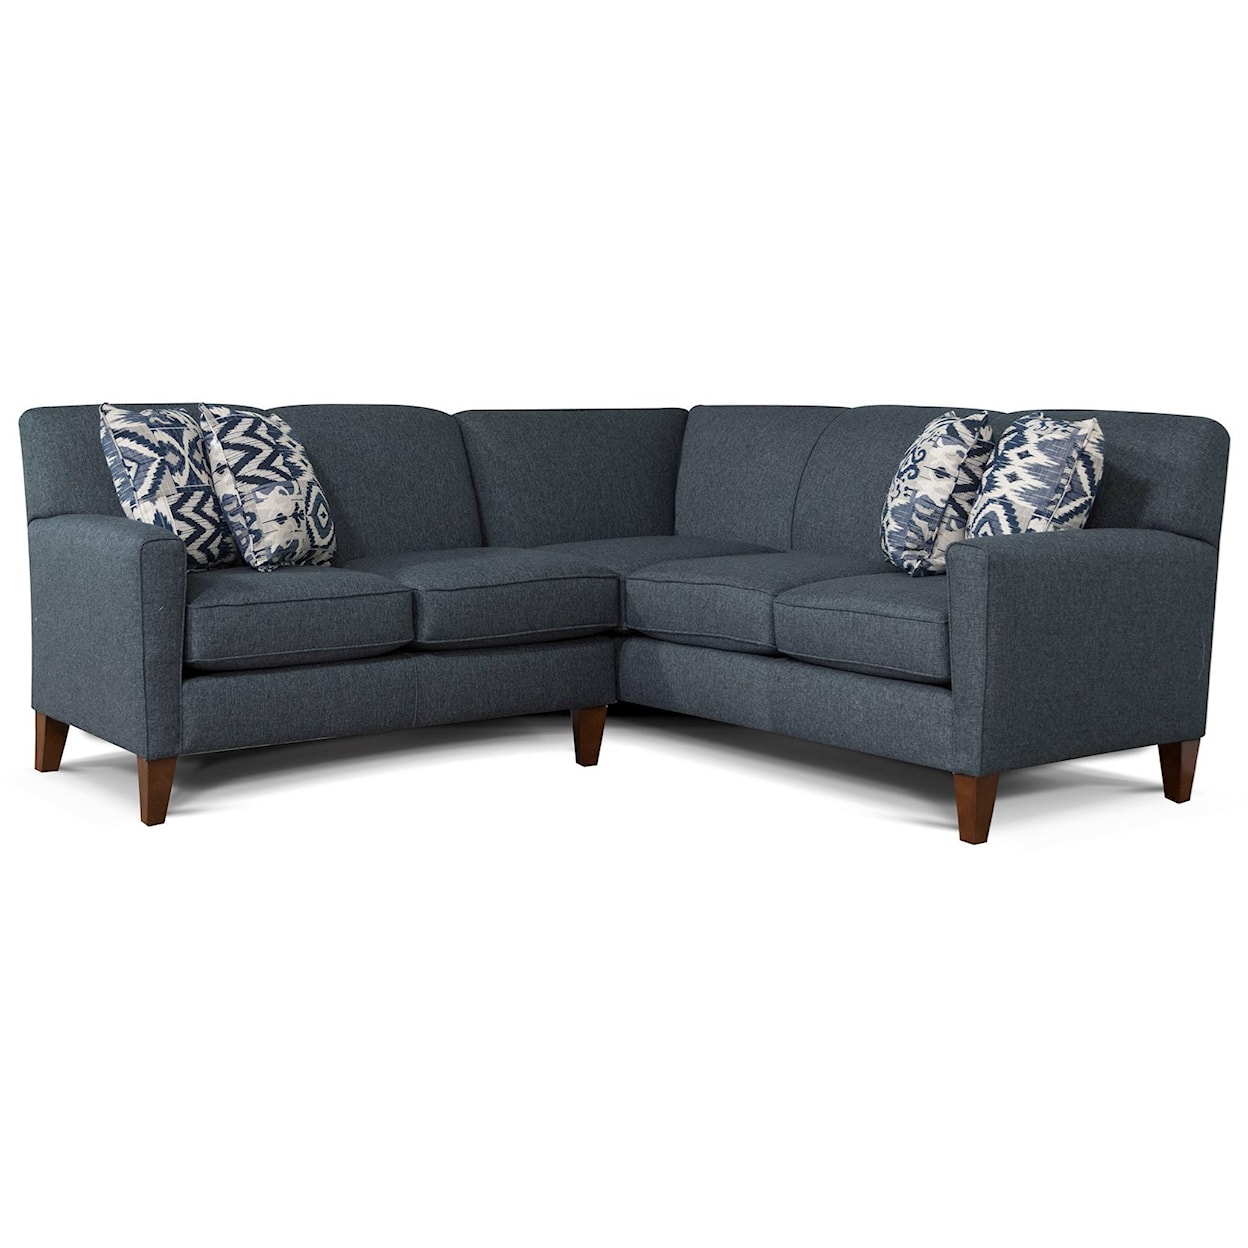 England Collegedale 2-Piece Sectional